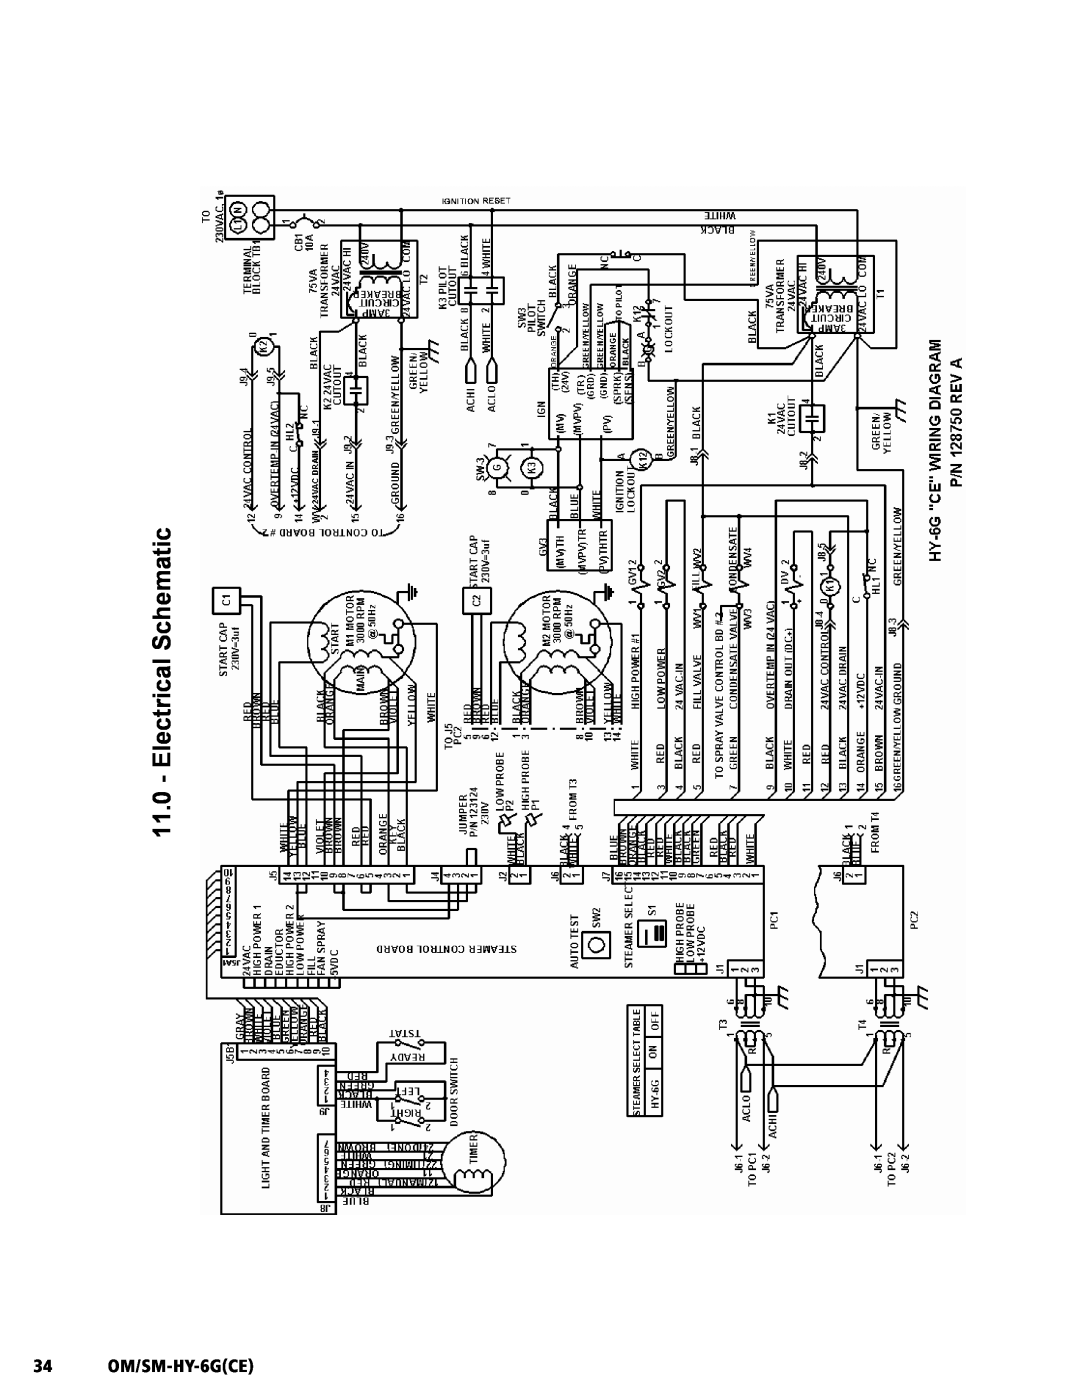 Unified Brands HY-6G(CE) service manual Electrical Schematic, 34 OM/SM-HY-6GCE 